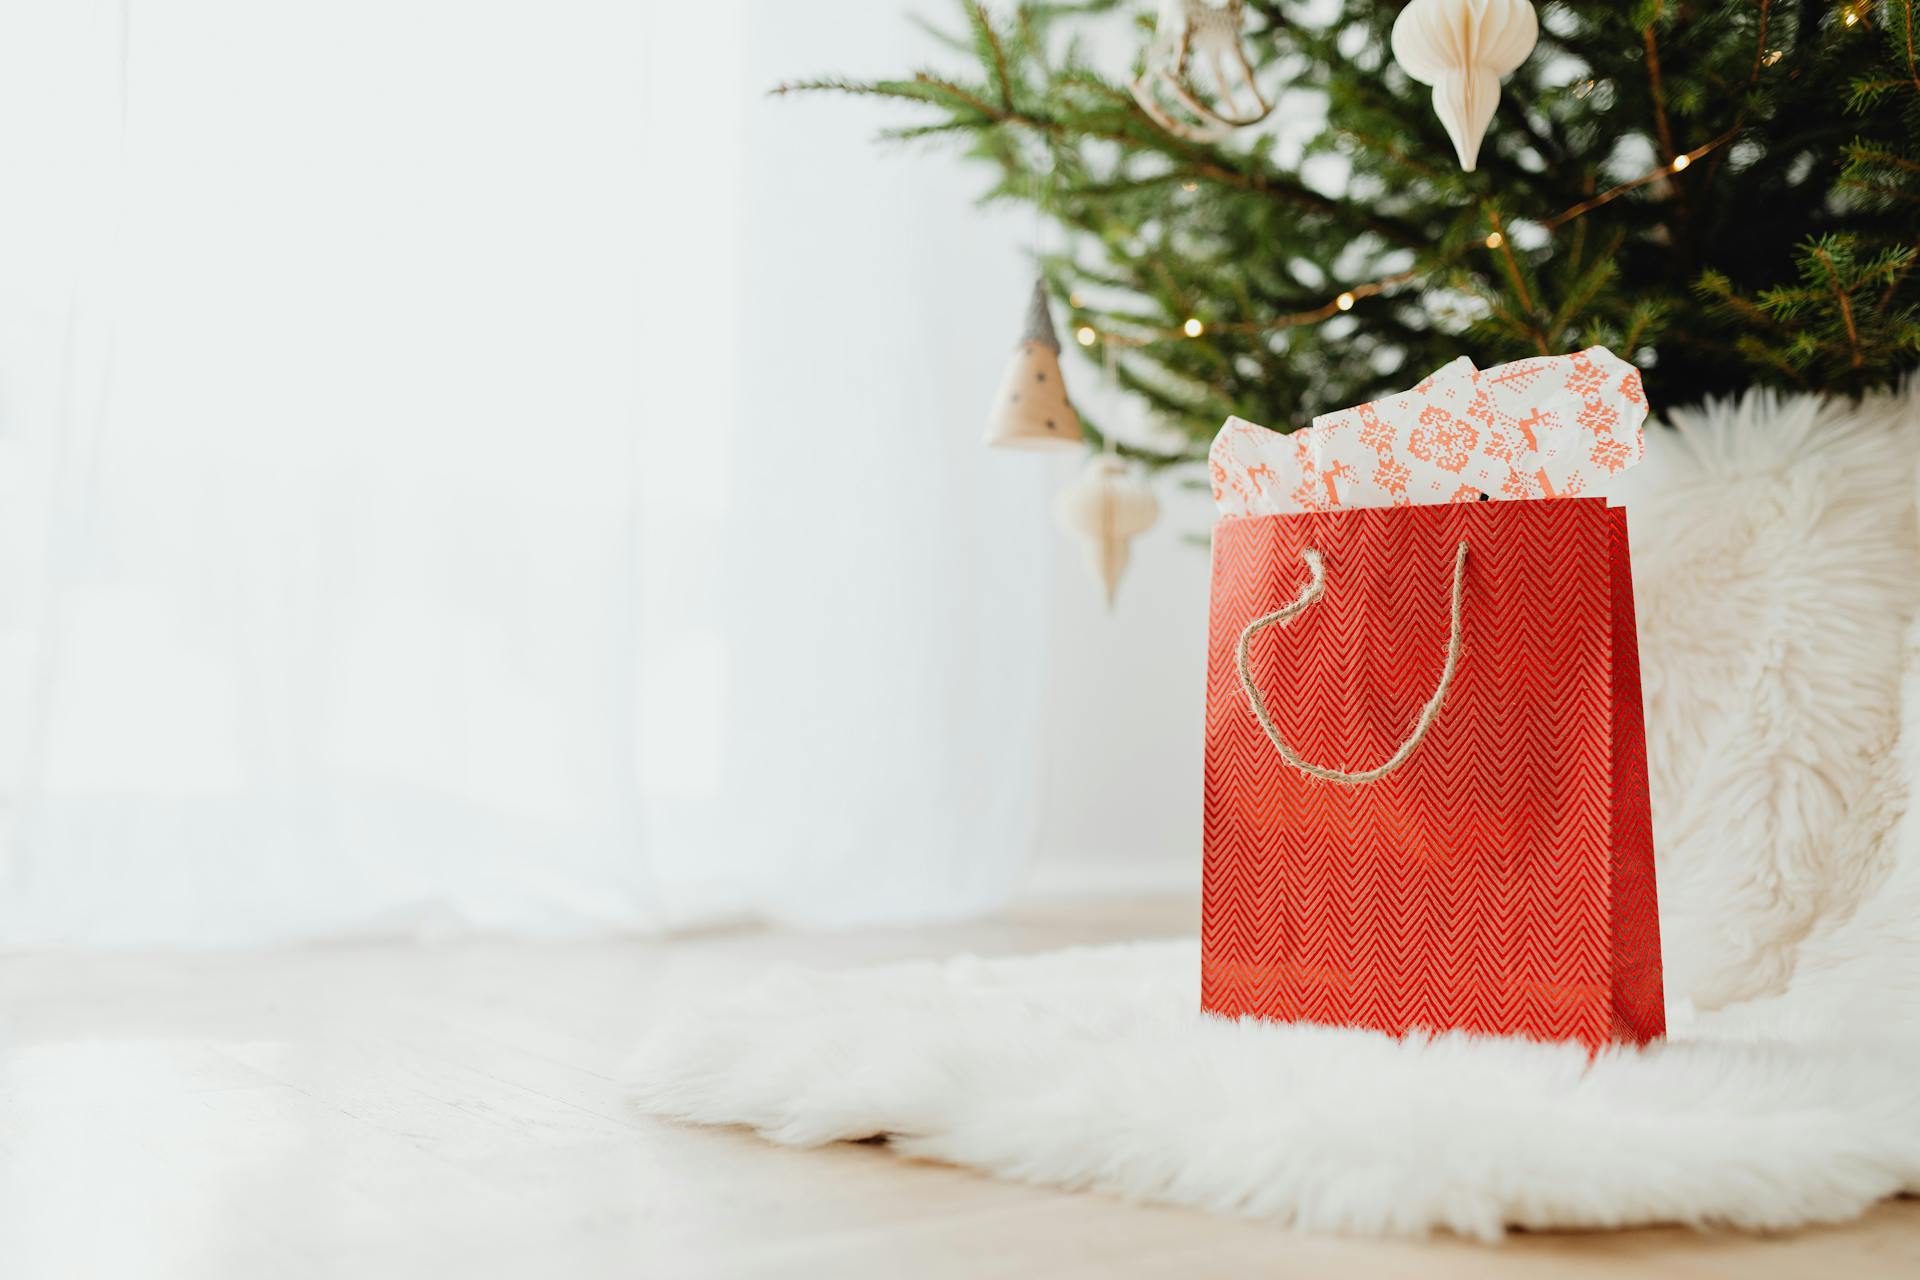 A red gift bag lying on a white fur carpet | Source: Pexels